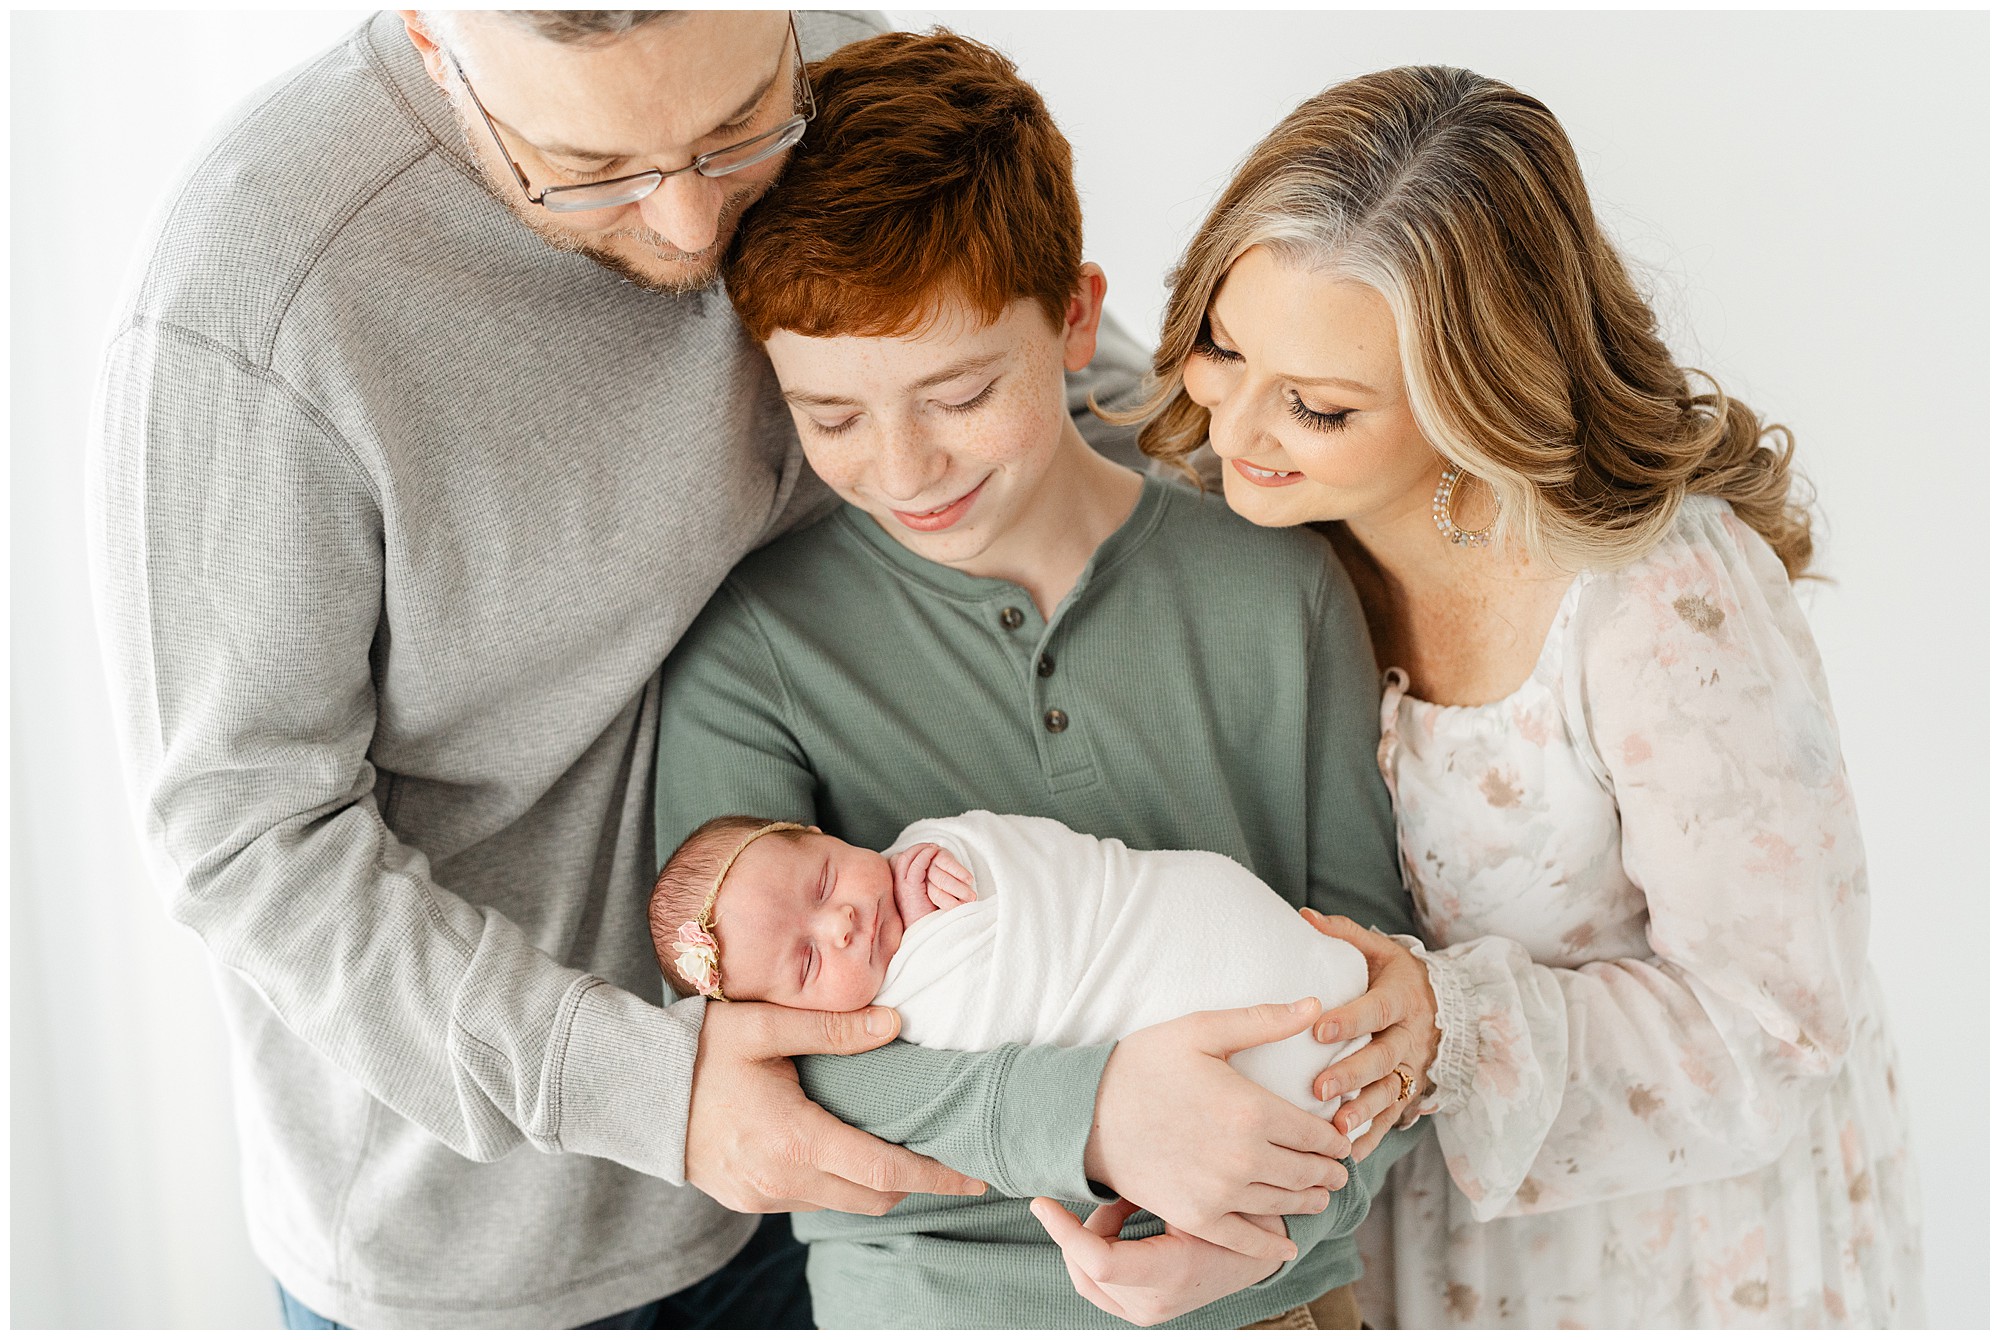 Portait of a young boy holding his newborn sister with his mom and dad hugging him and looking down at the baby in an Atlanta studio newborn photography session.